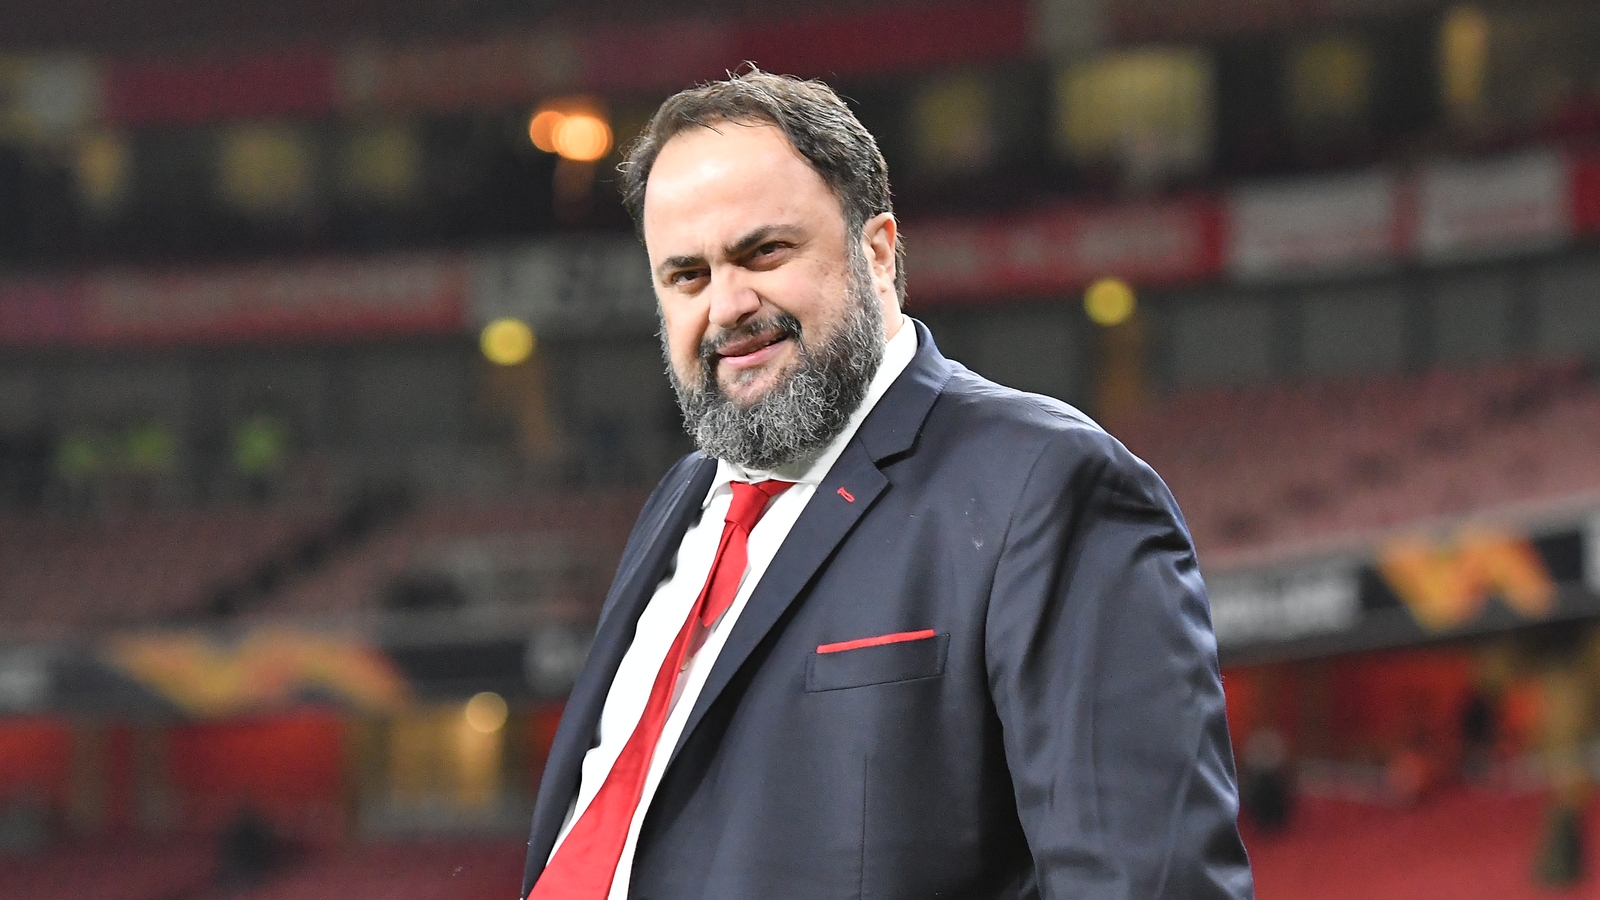 Football team owner Evangelos Marinakis tests positive for COVID-19 infection. Image via RTE.